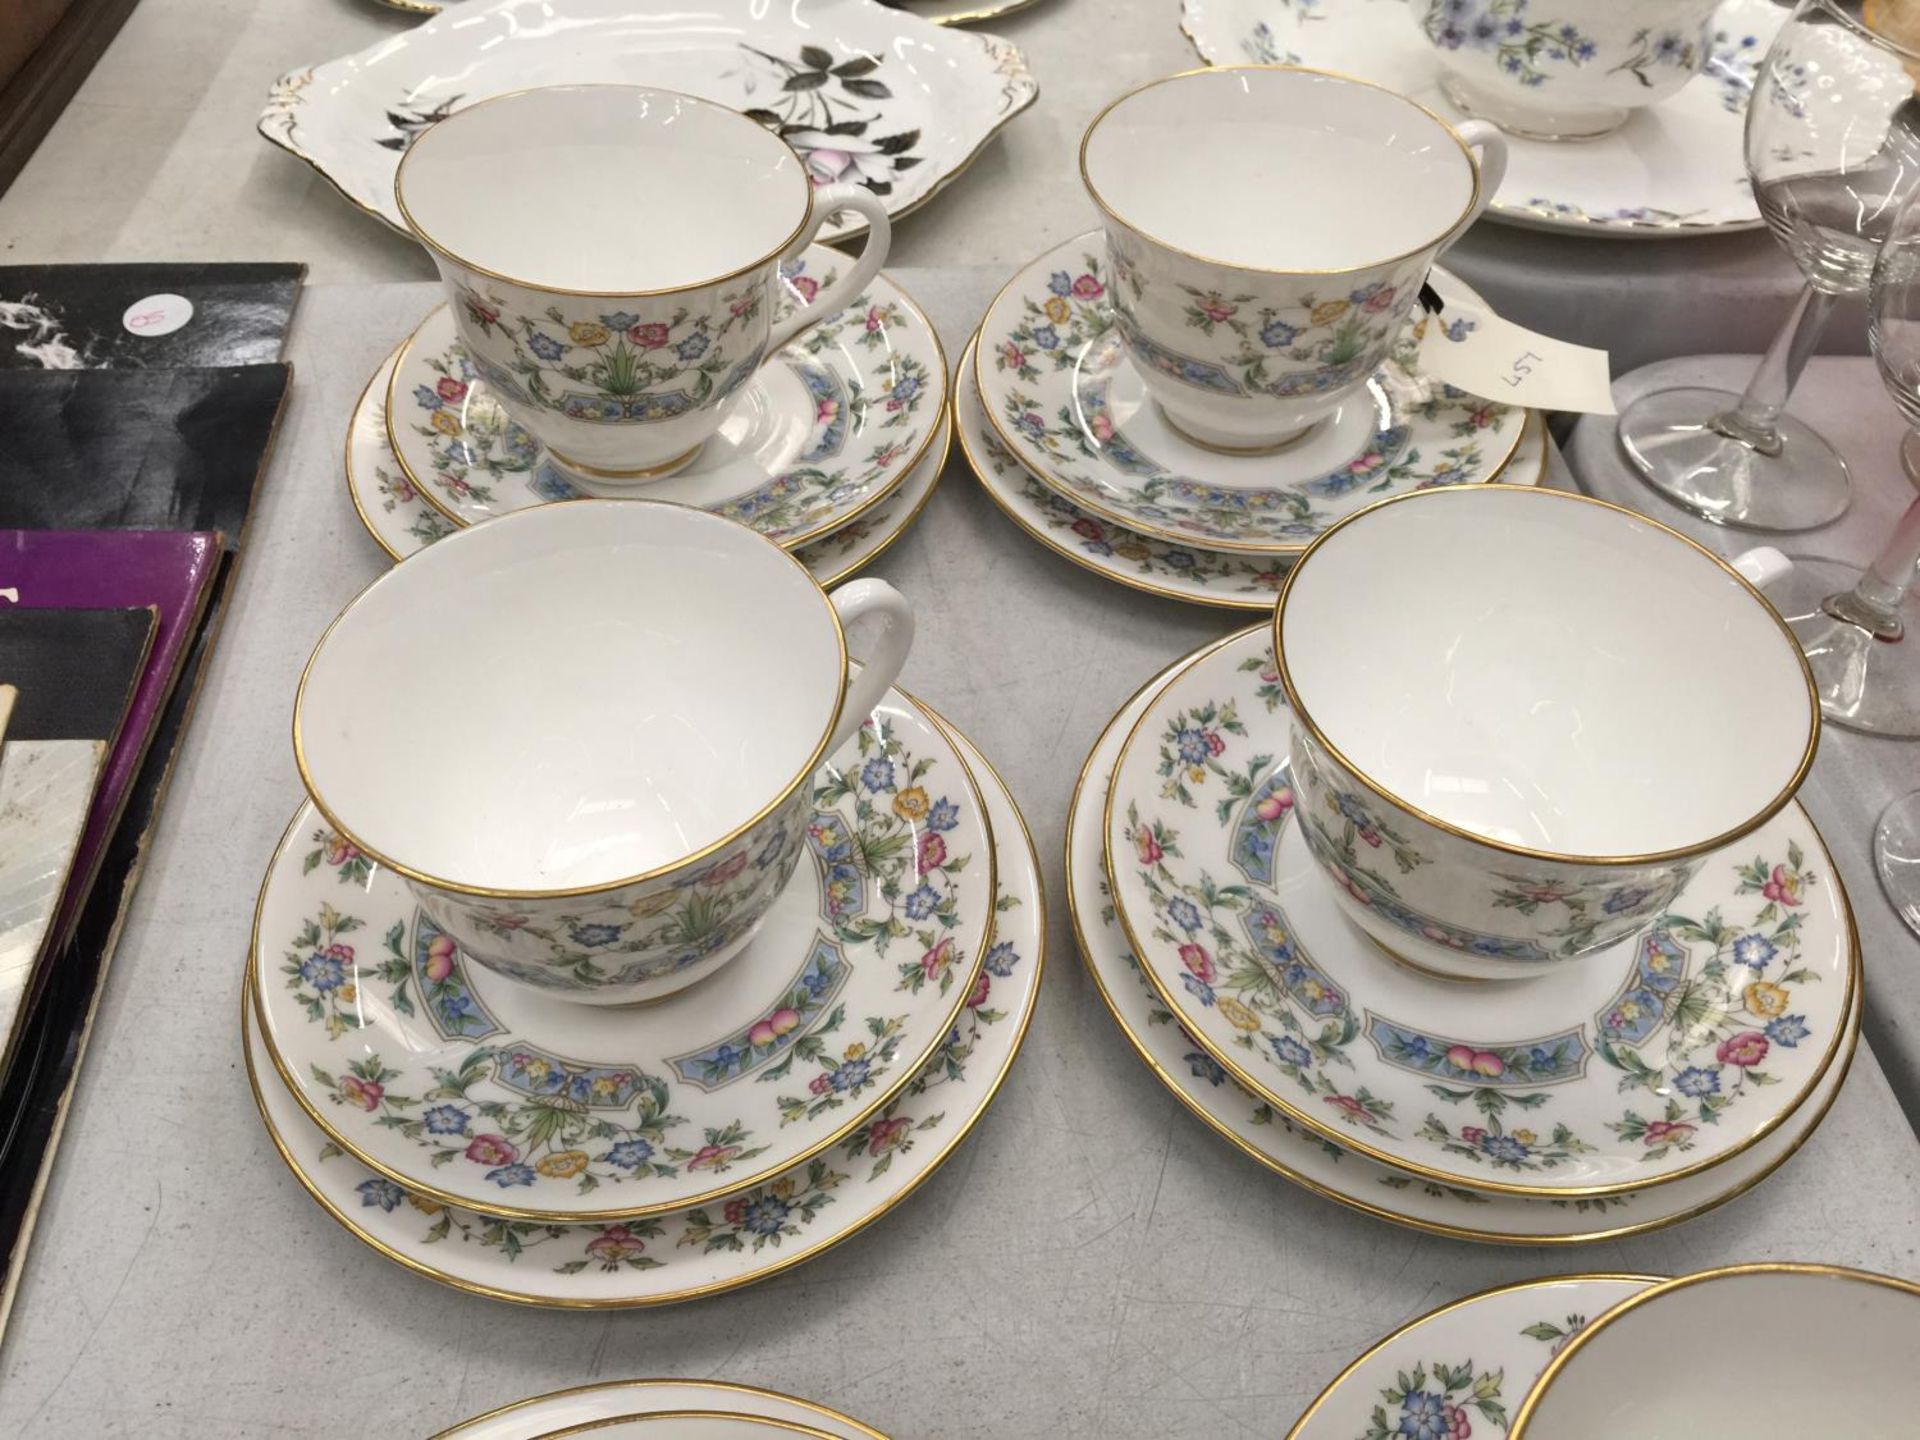 SIX ROYAL WORCESTER CHINA CUP, SAUCER AND PLATE TRIOS - Image 3 of 4